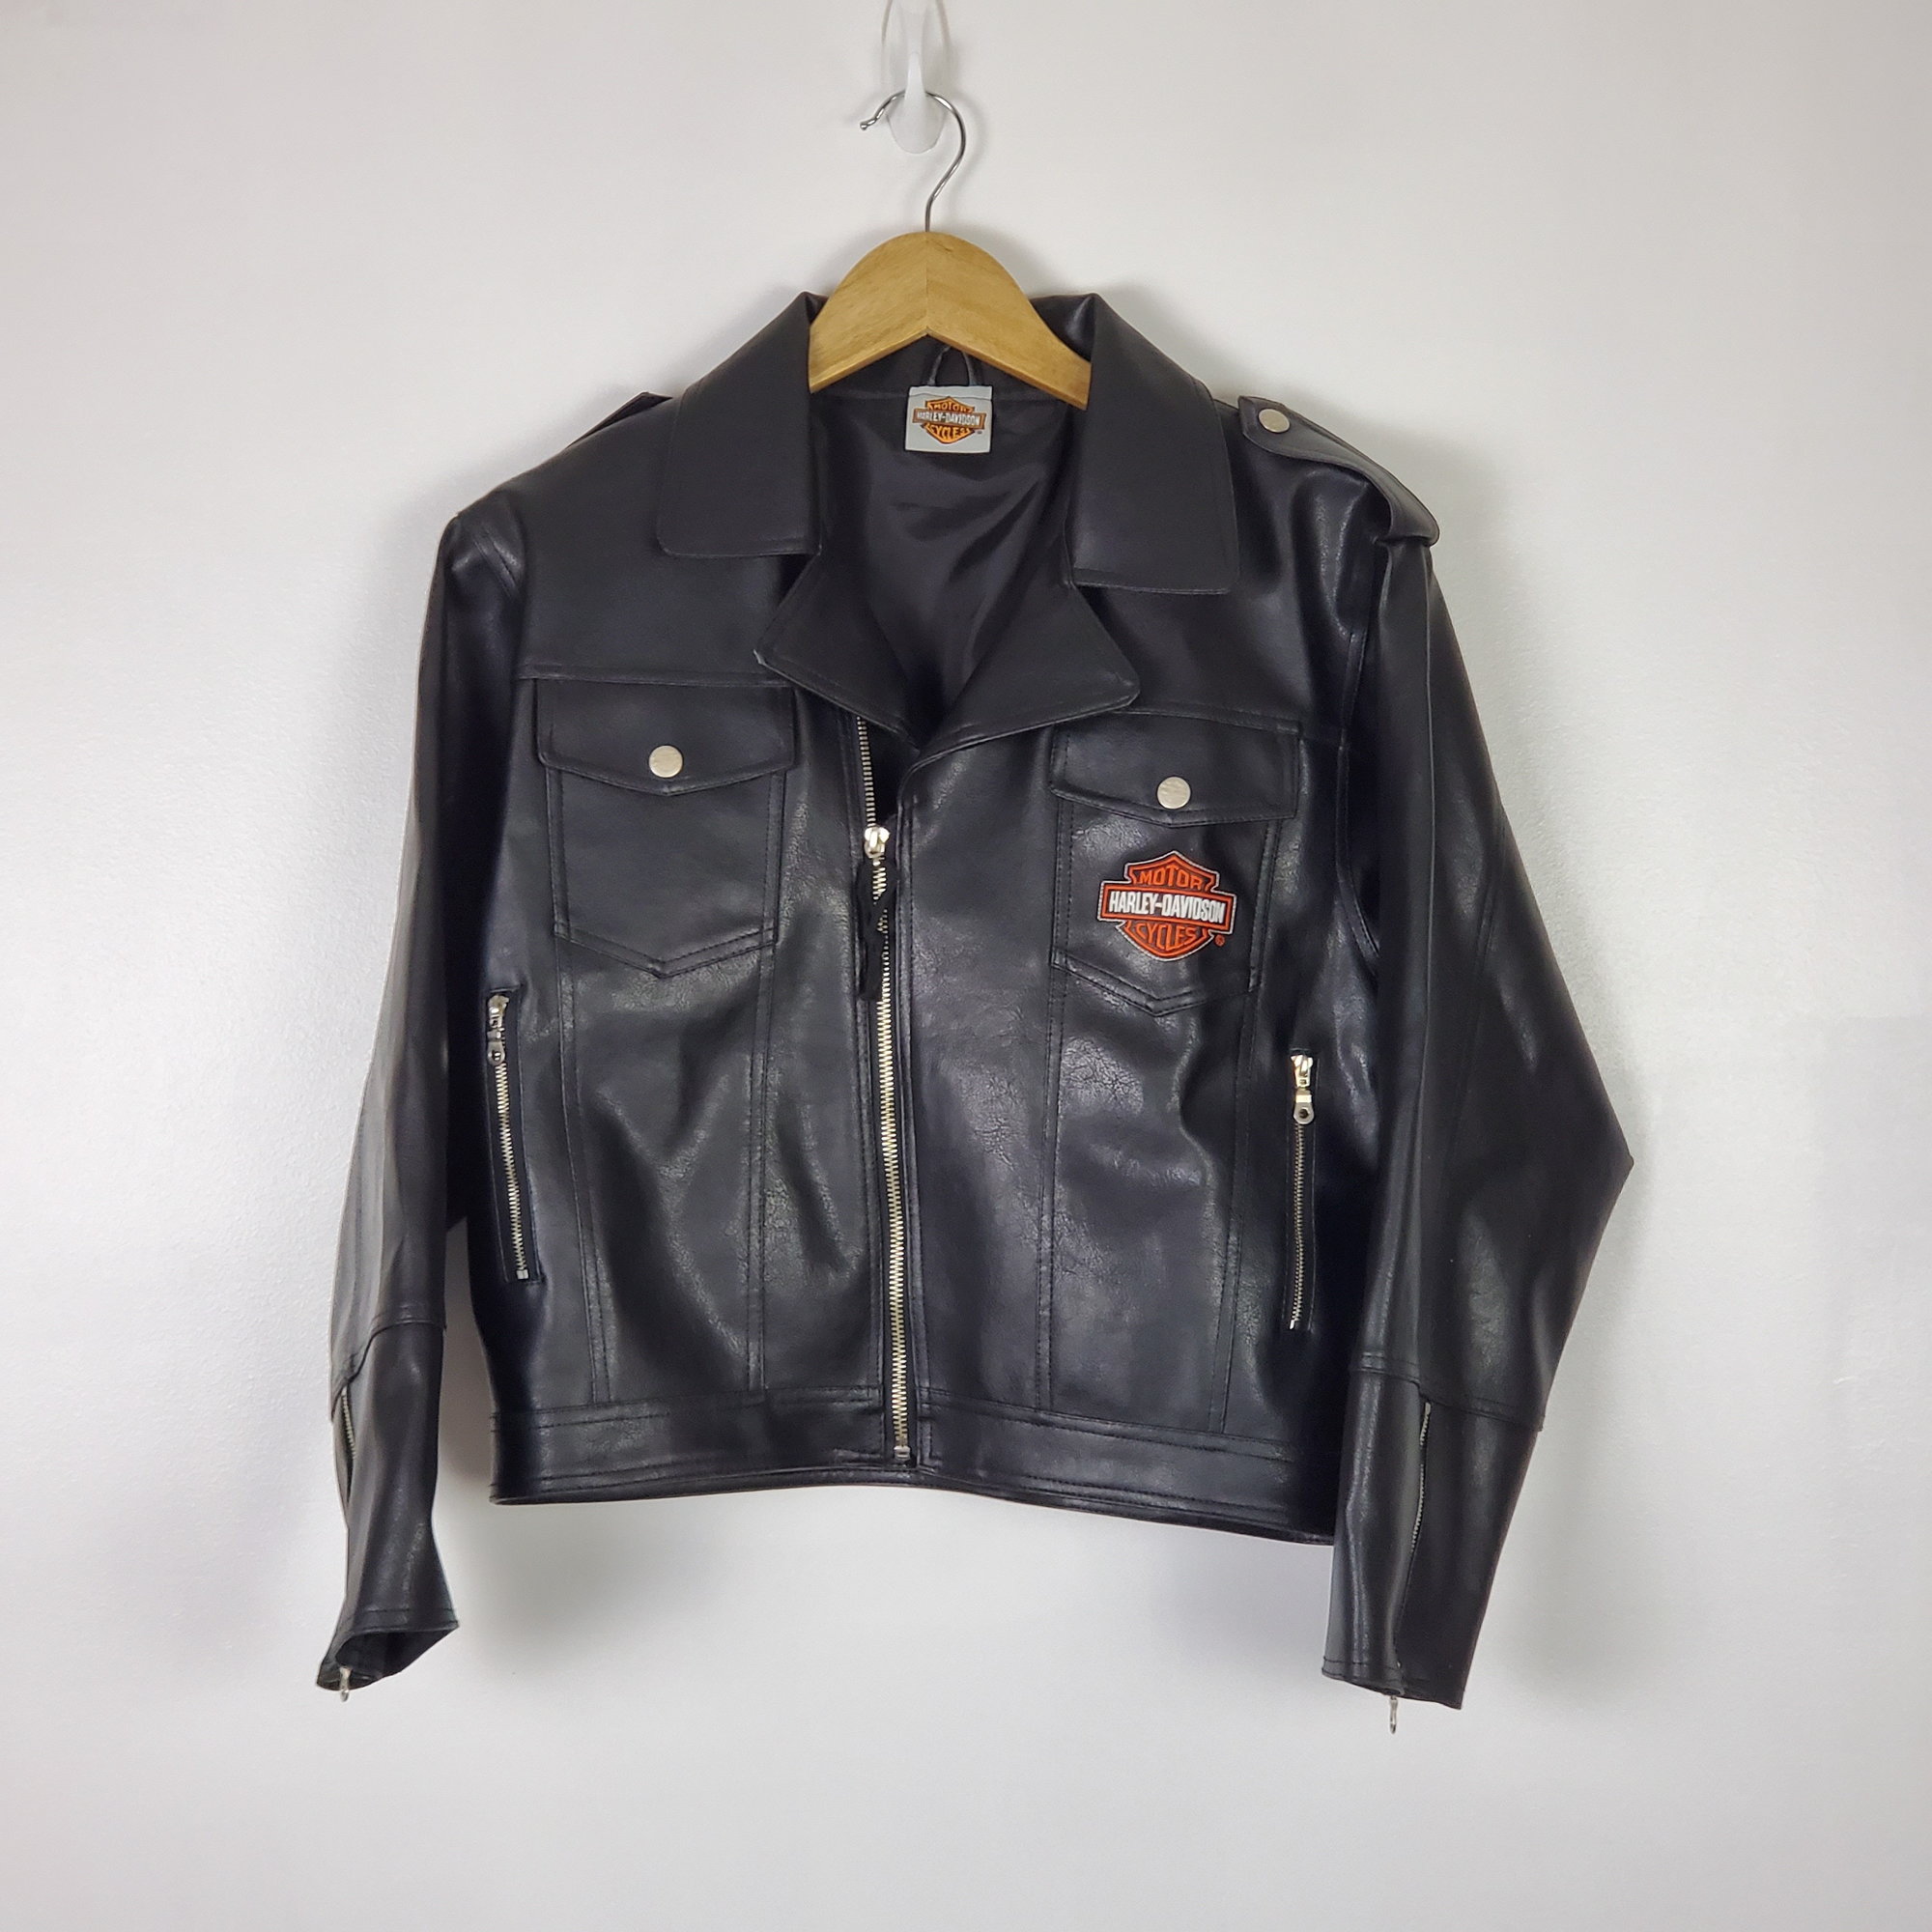 Women S Leather Jacket Real Or Fake Page 2 Harley Davidson Forums